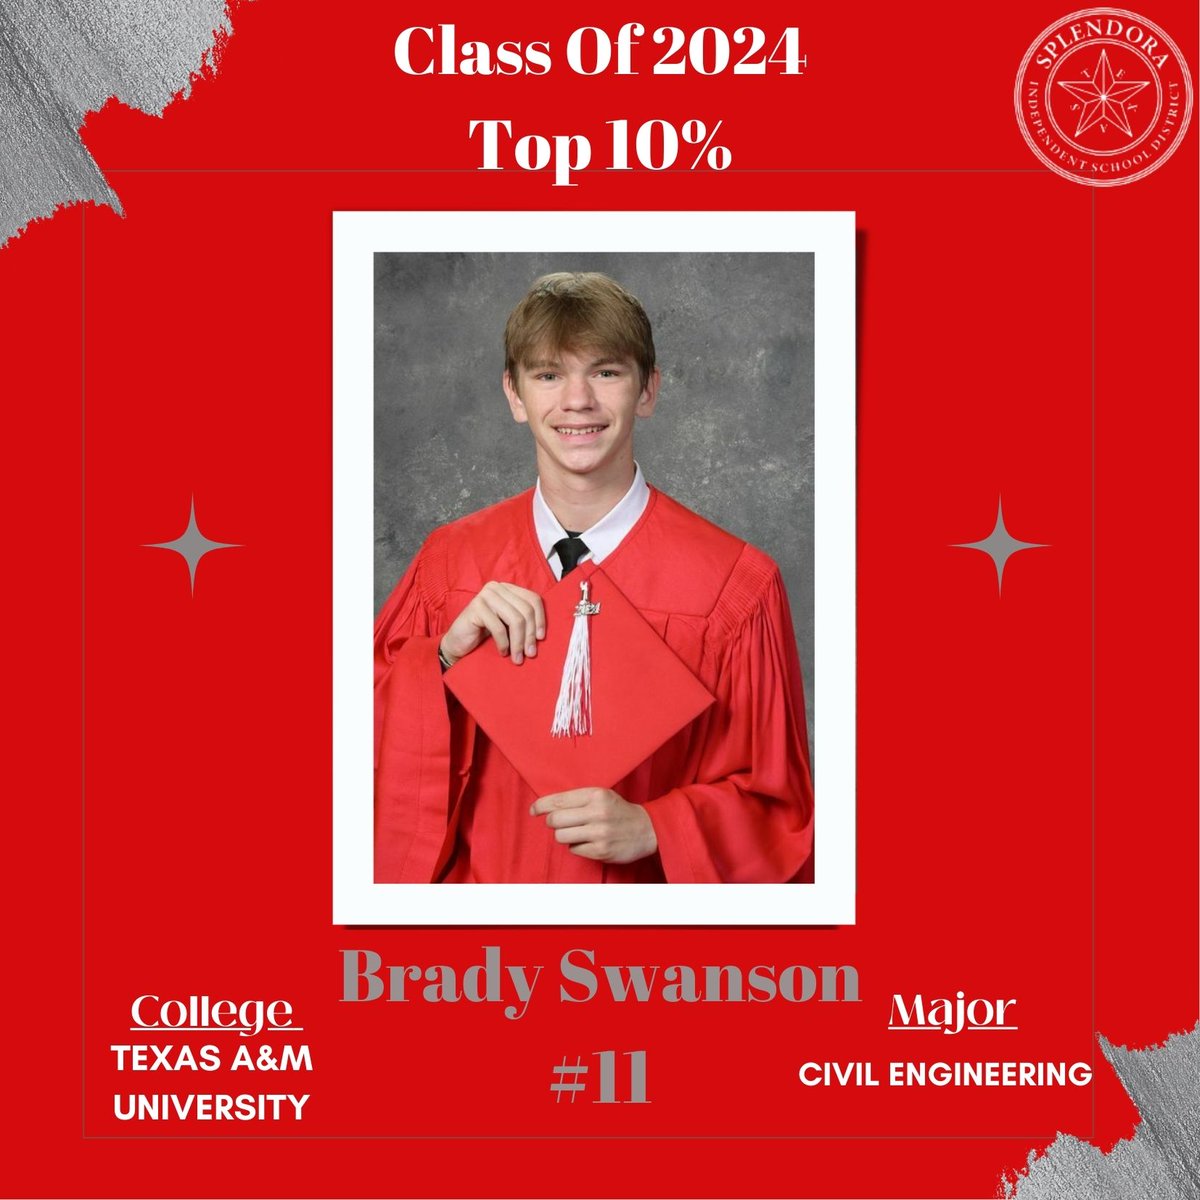 We would like to congratulate each student in the top 10 percent of the graduating 2024 class. We are very proud of their academic accomplishments. We will be counting down each day to celebrate each of our students' success. Congratulations, Brady Swanson - #11!